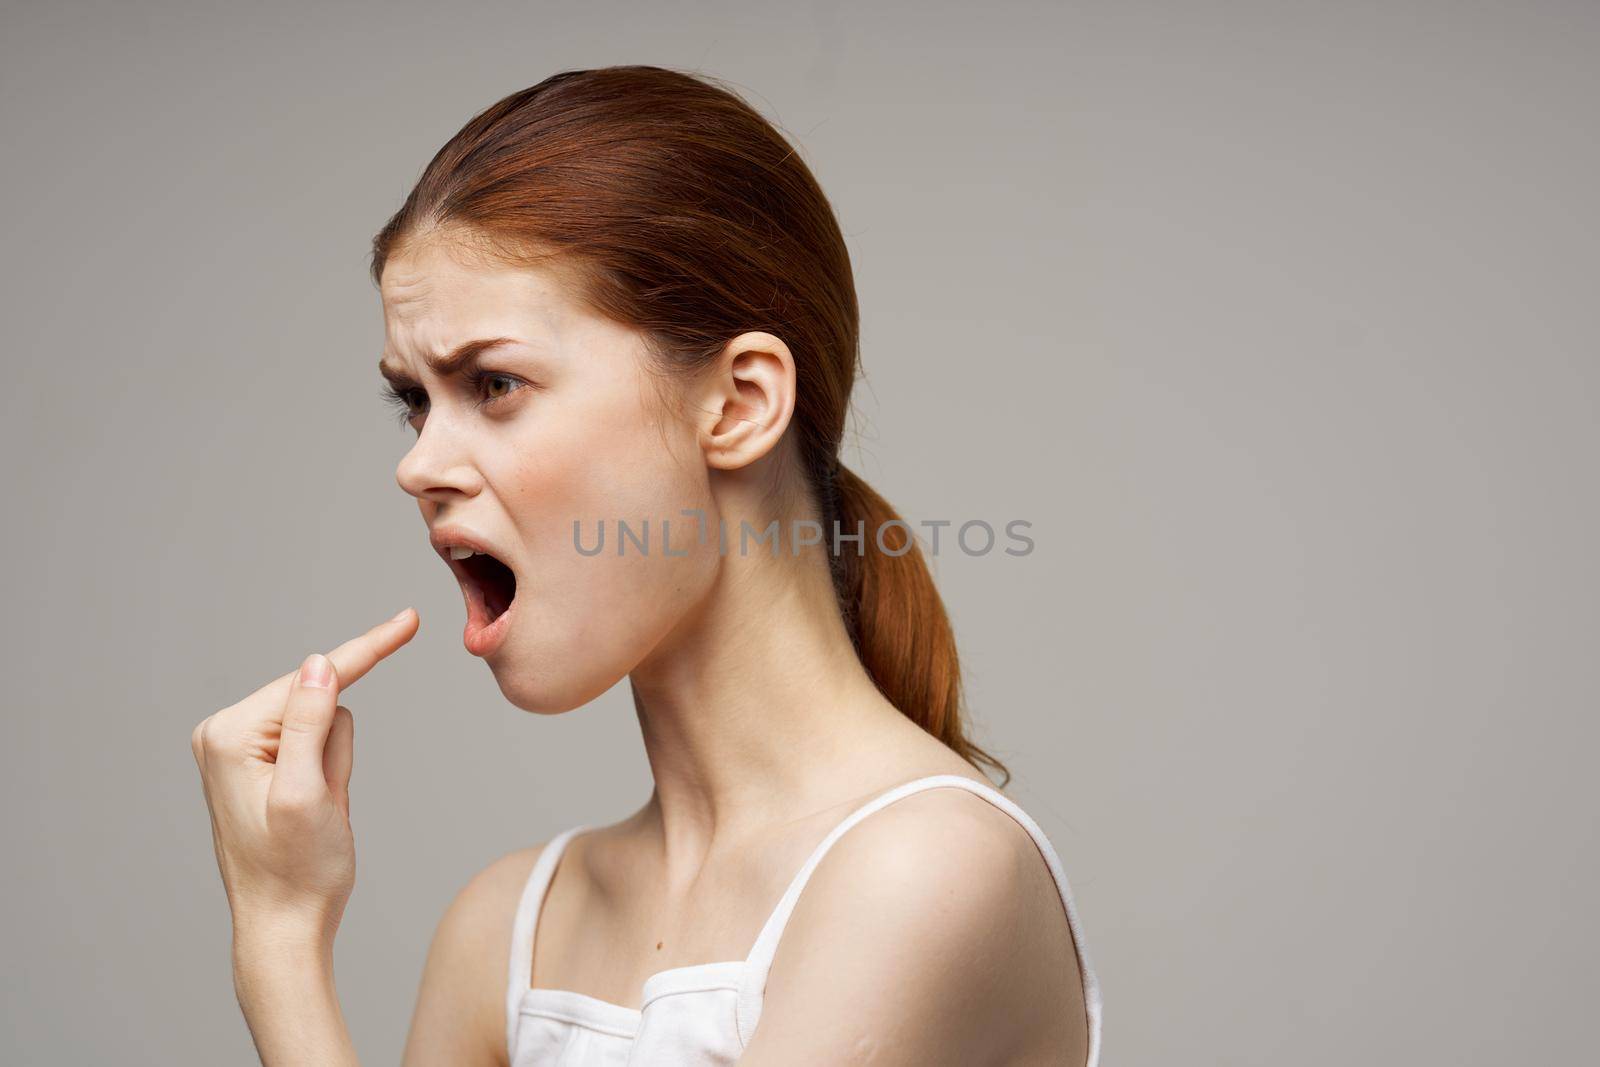 woman toothache health problems disorder studio treatment. High quality photo